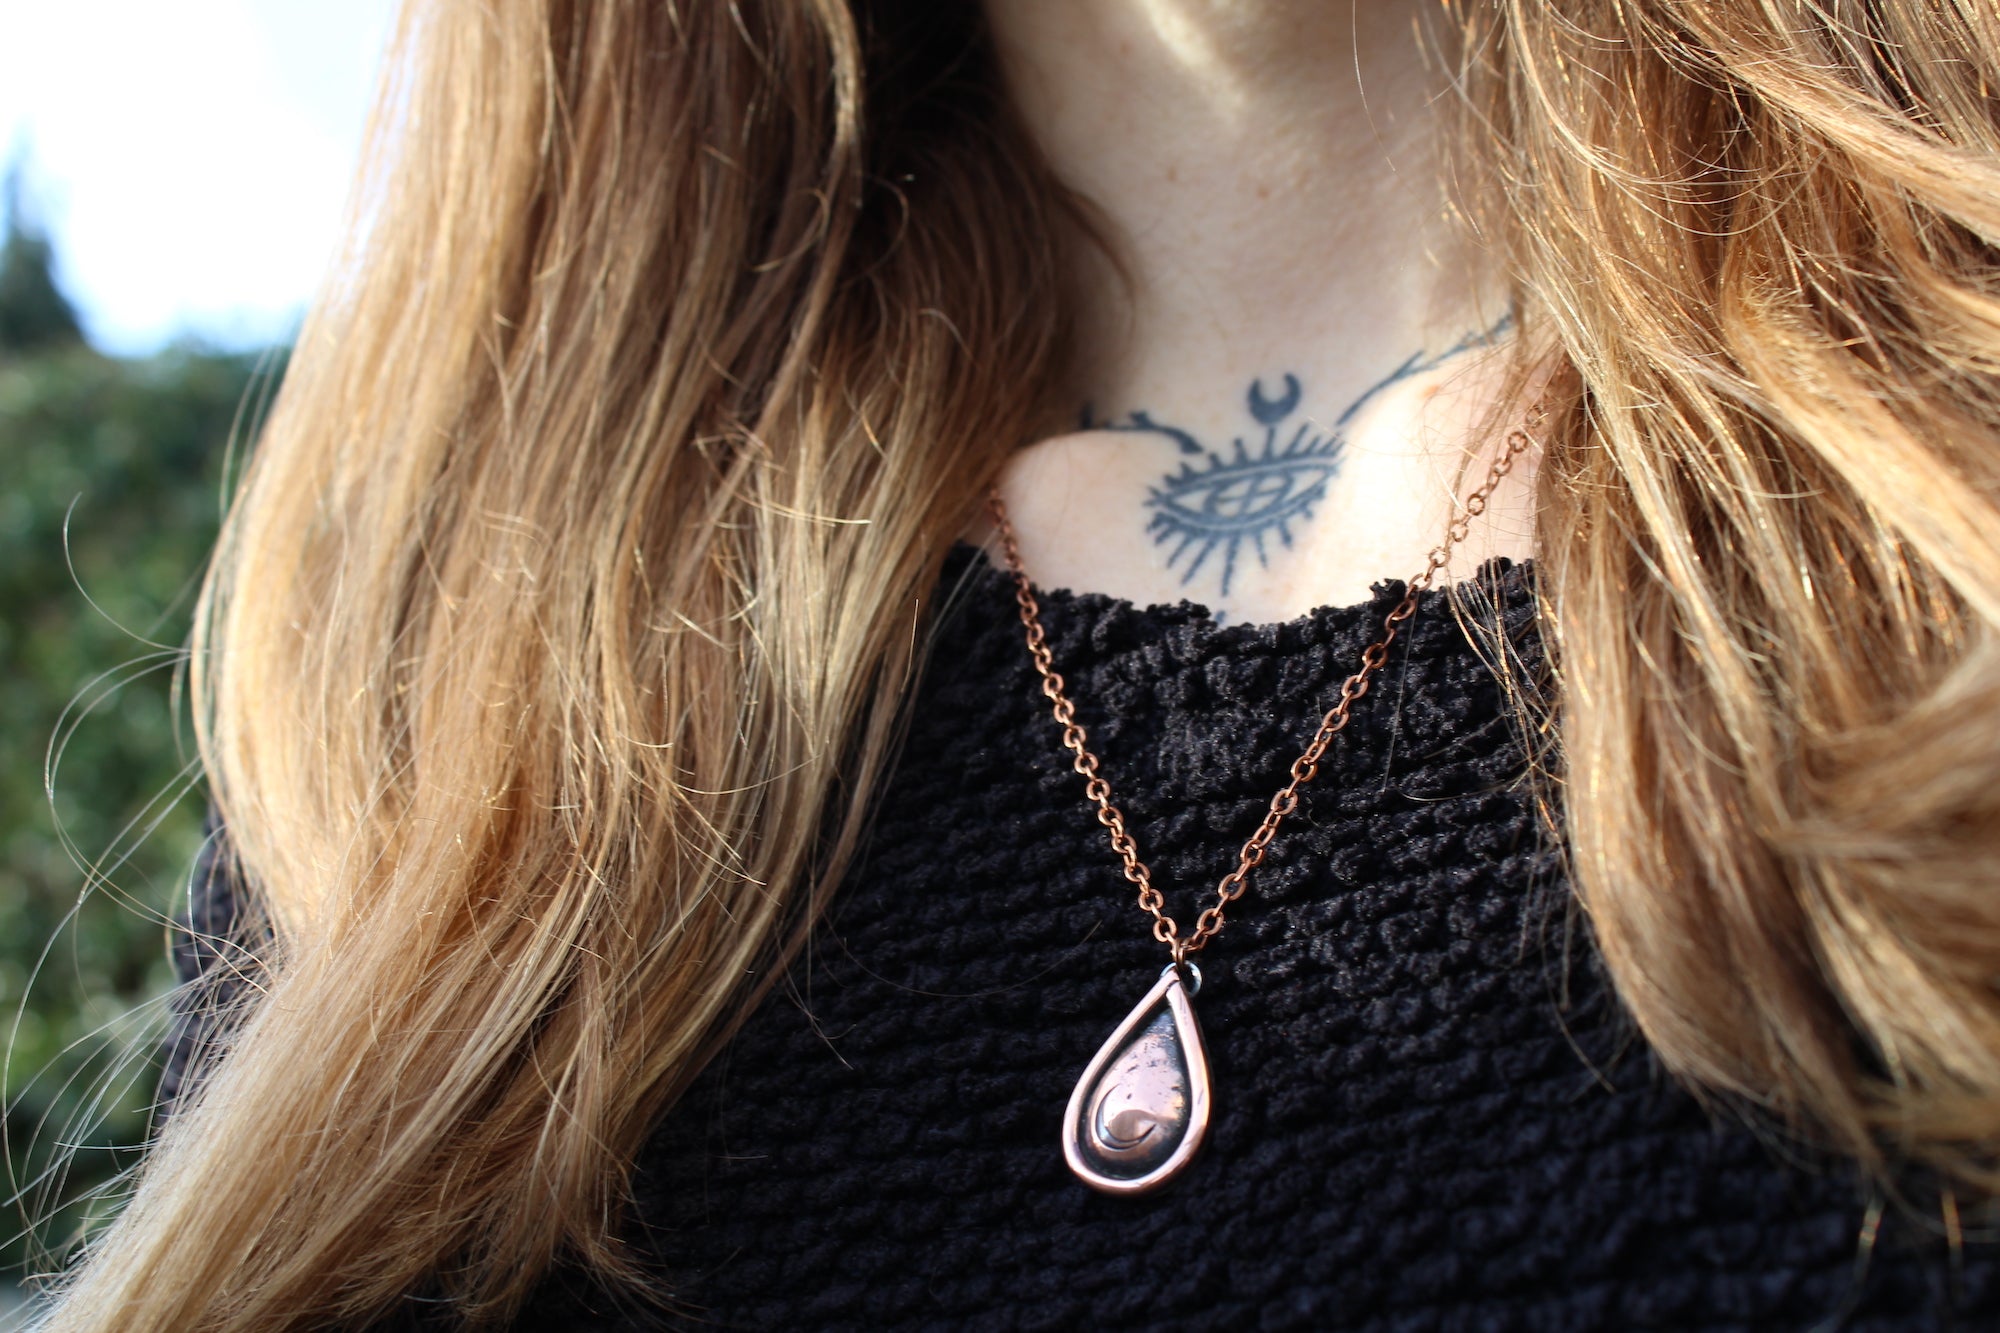 RELEASE + RECEIVE Handmade Copper Necklace